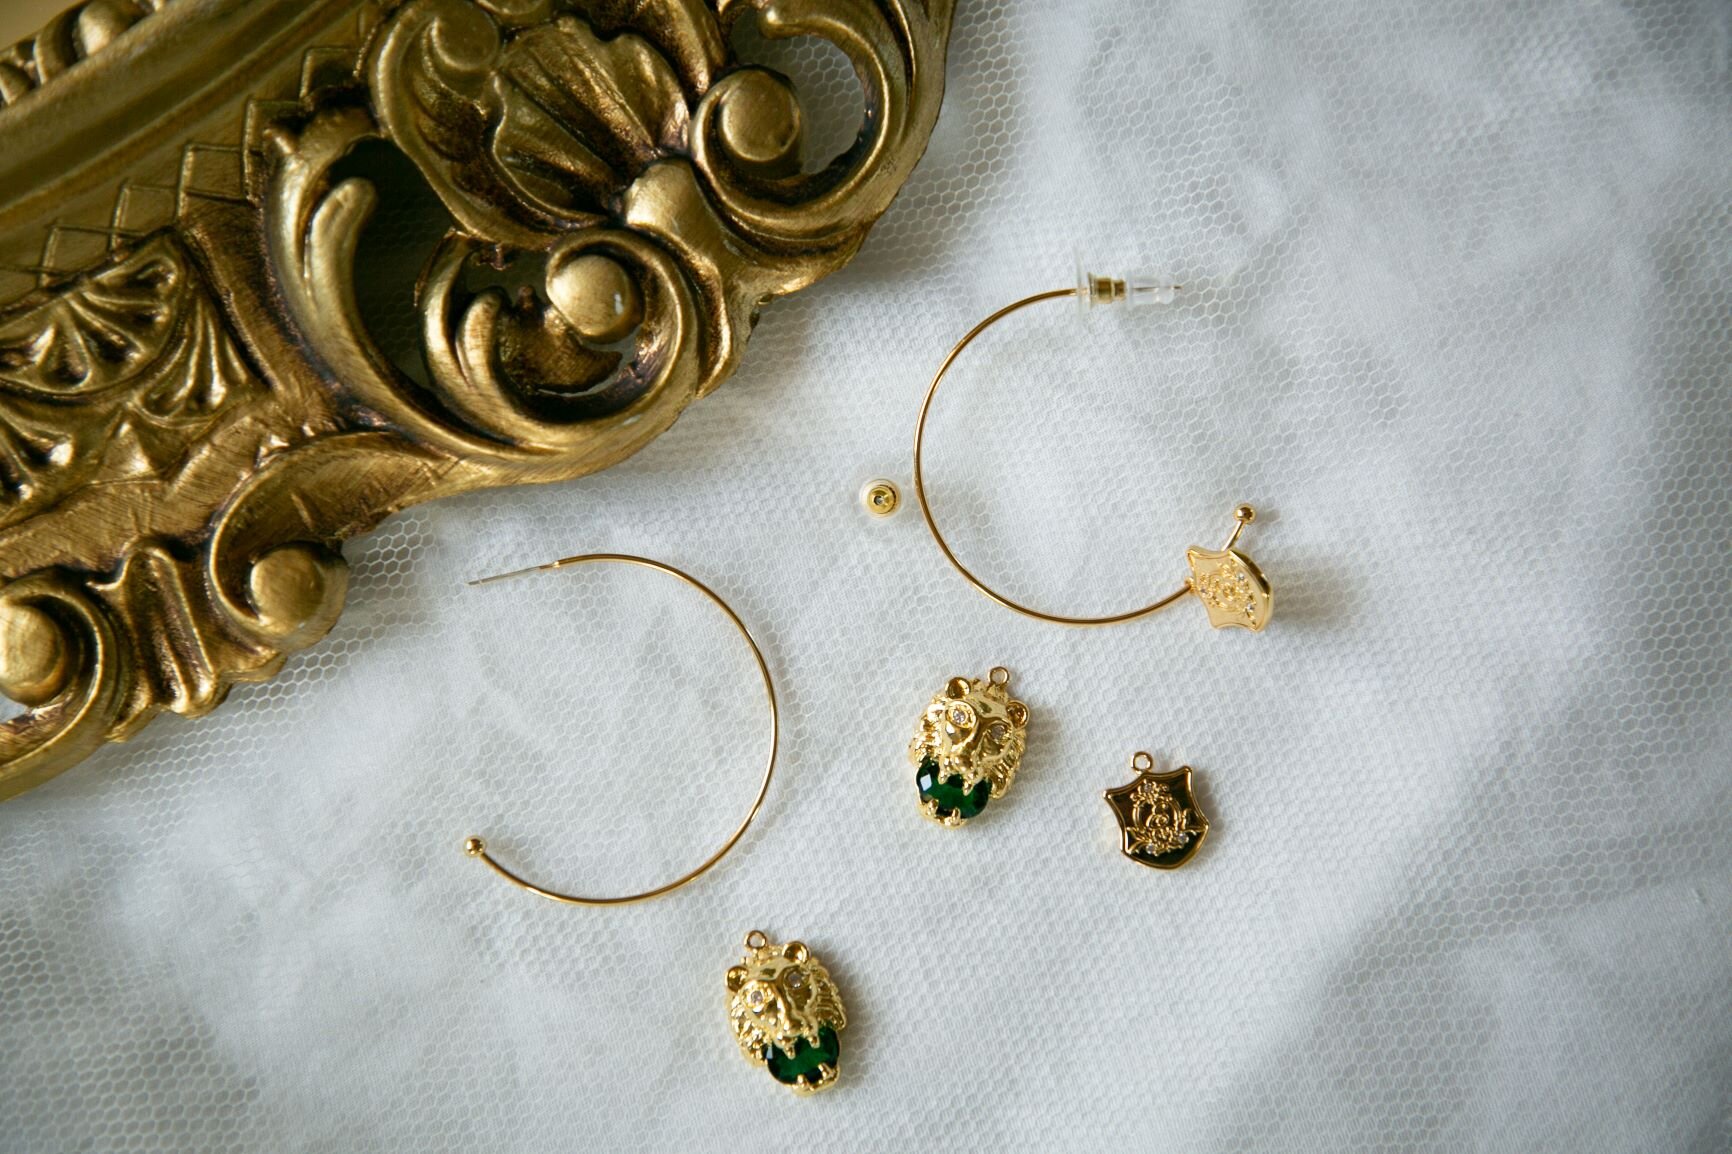 Medium (40mm) Gold Plated Hoops and Lion Head charm 8.JPG